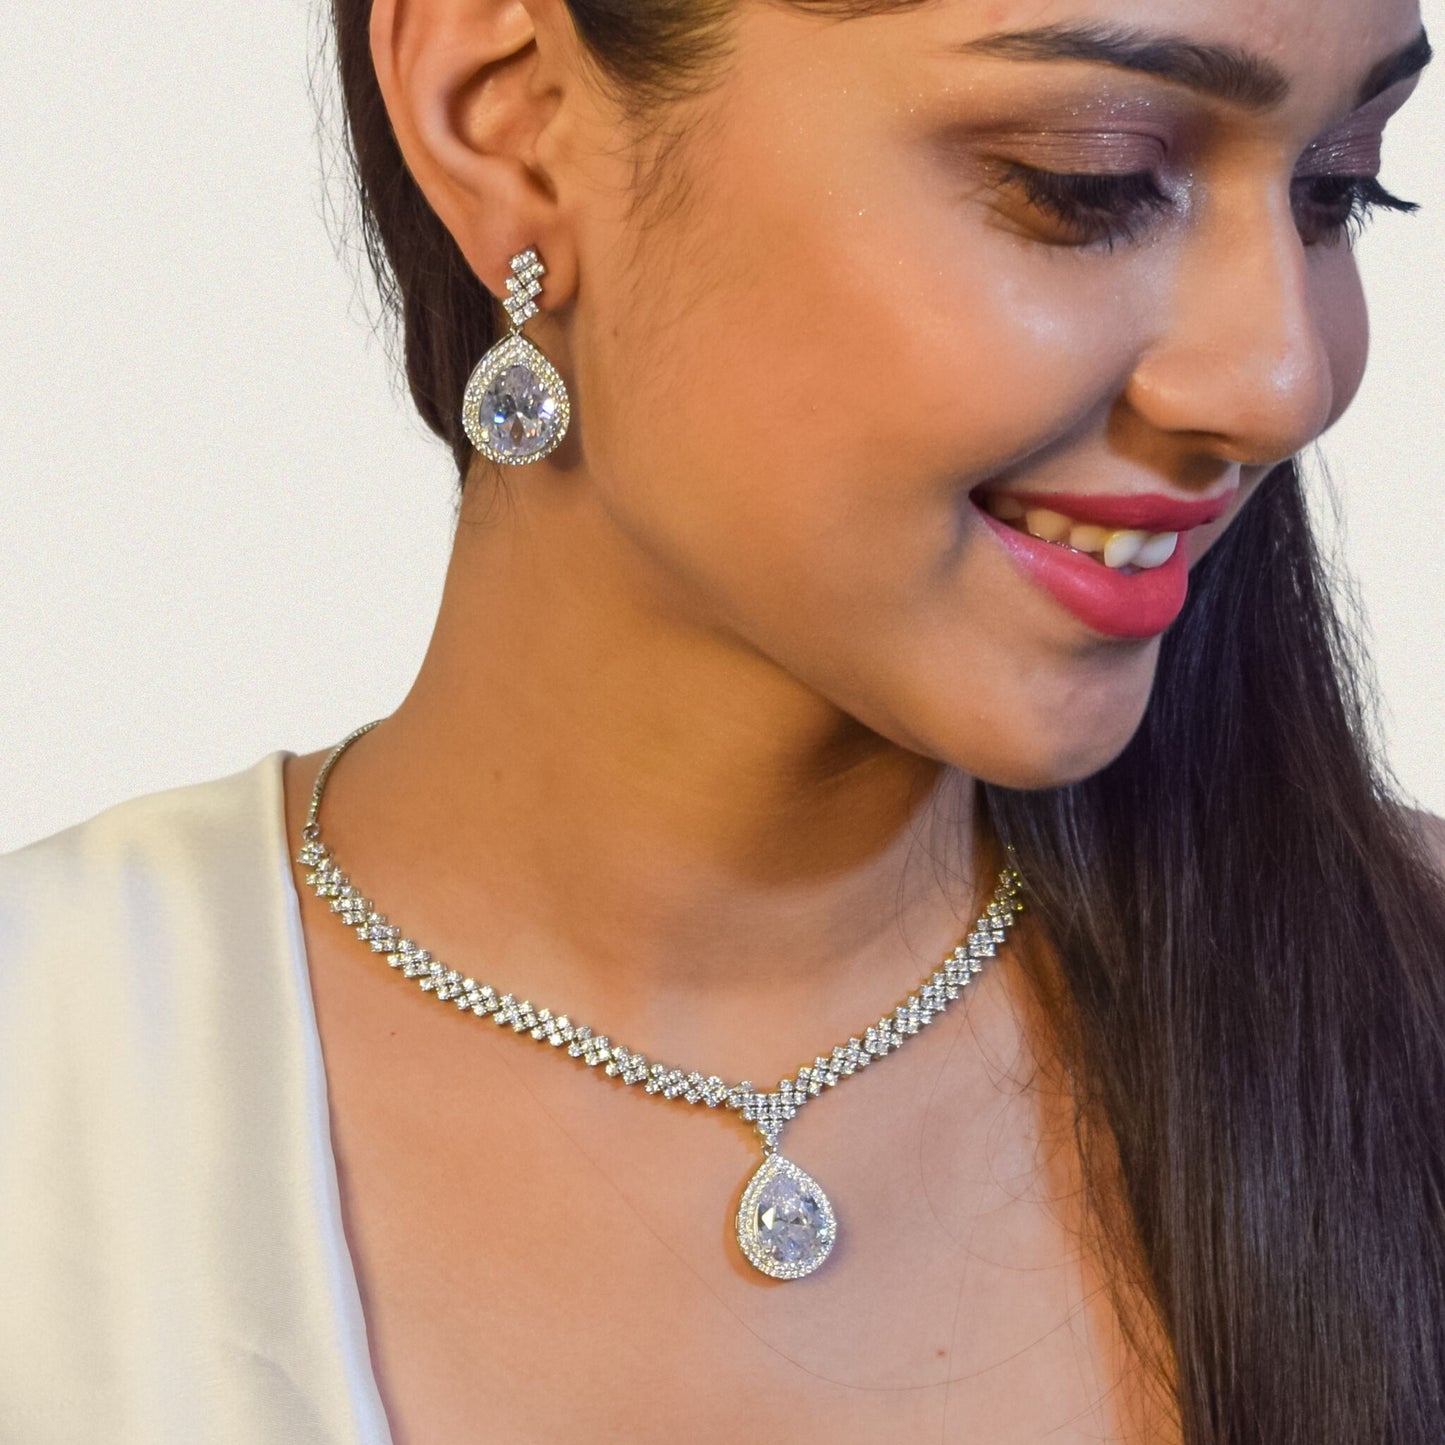 Dazzling CZ Cubic Zircon Necklace Set - Affordable Elegance for Every Occasion